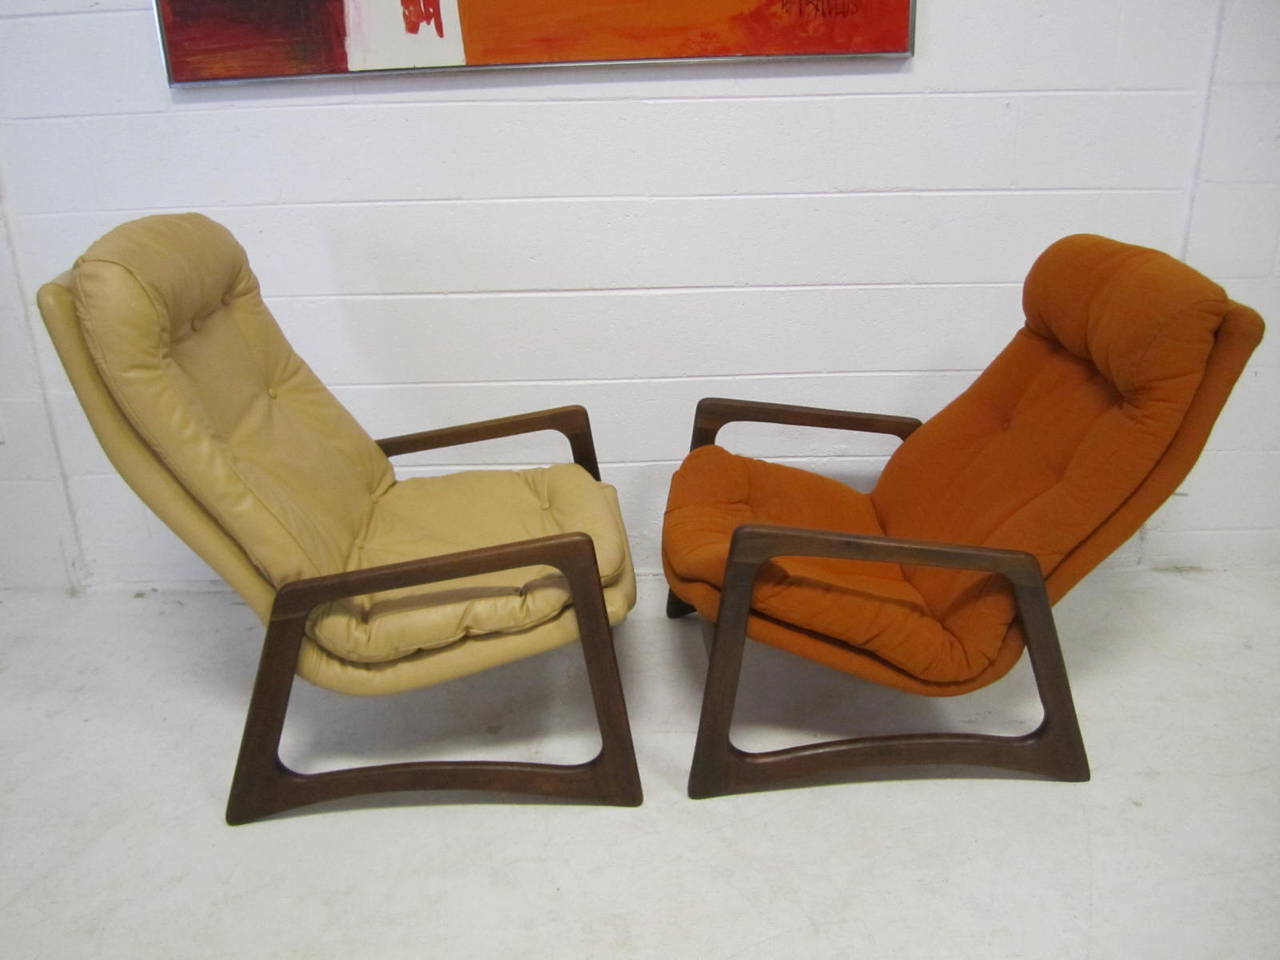 Fabulous Pair of sculptural walnut Adrian Pearsall Lounge chairs.  This pair will need re-upholstery but that's what you designers are looking for anyway-right?  The slightly smaller solid walnut frames are in fantastic condition.  These are